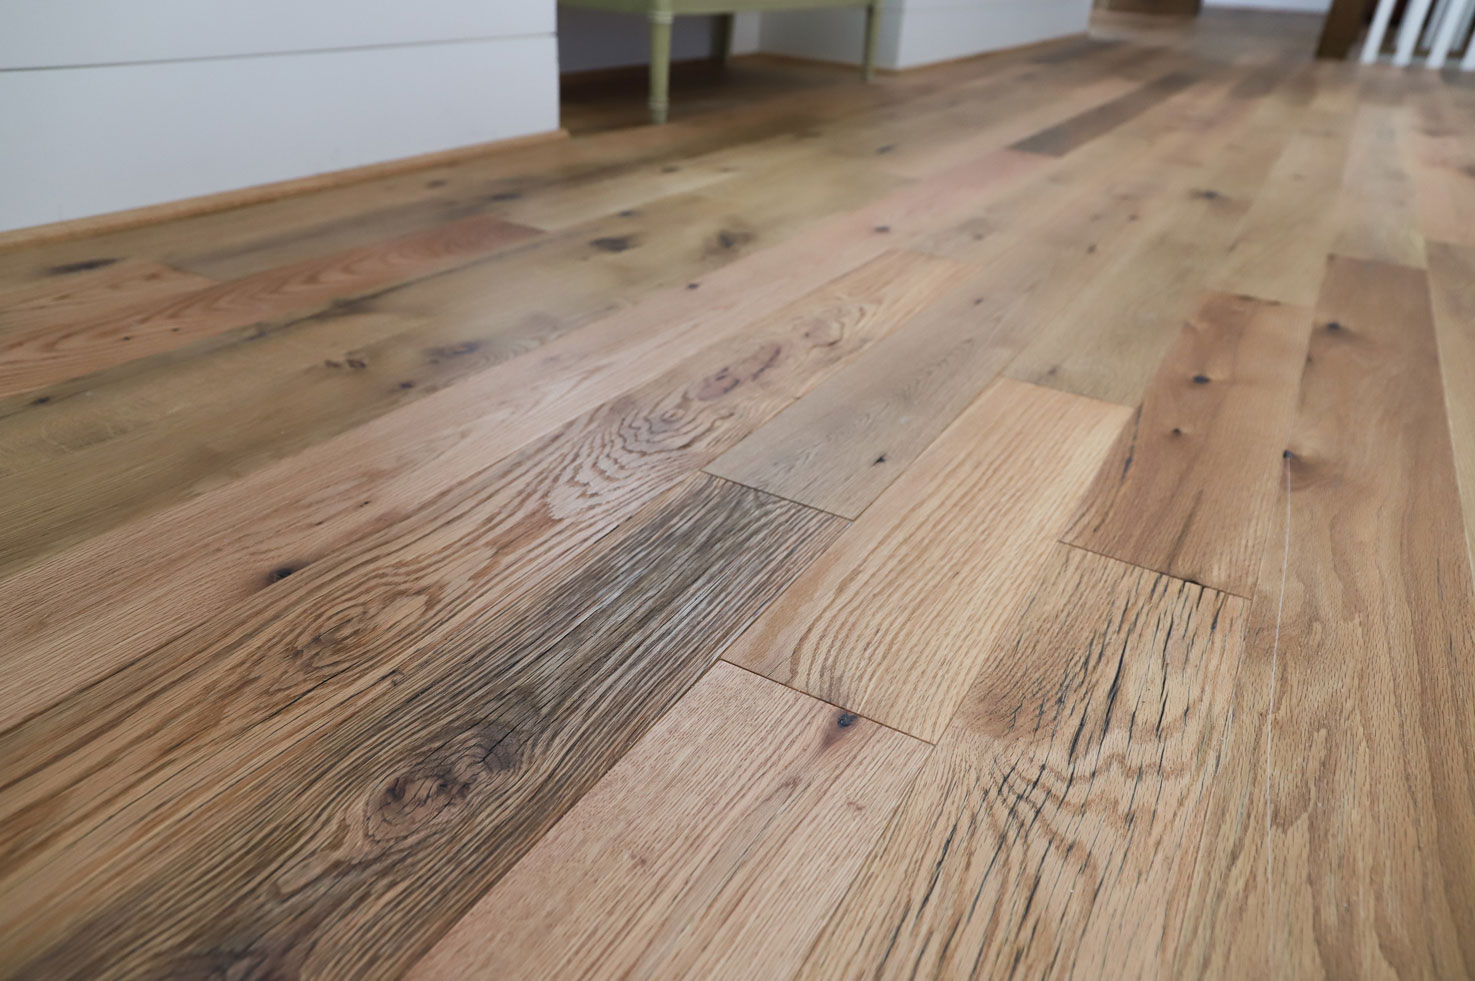 Image of Horse Country Oak floor in wide plank form